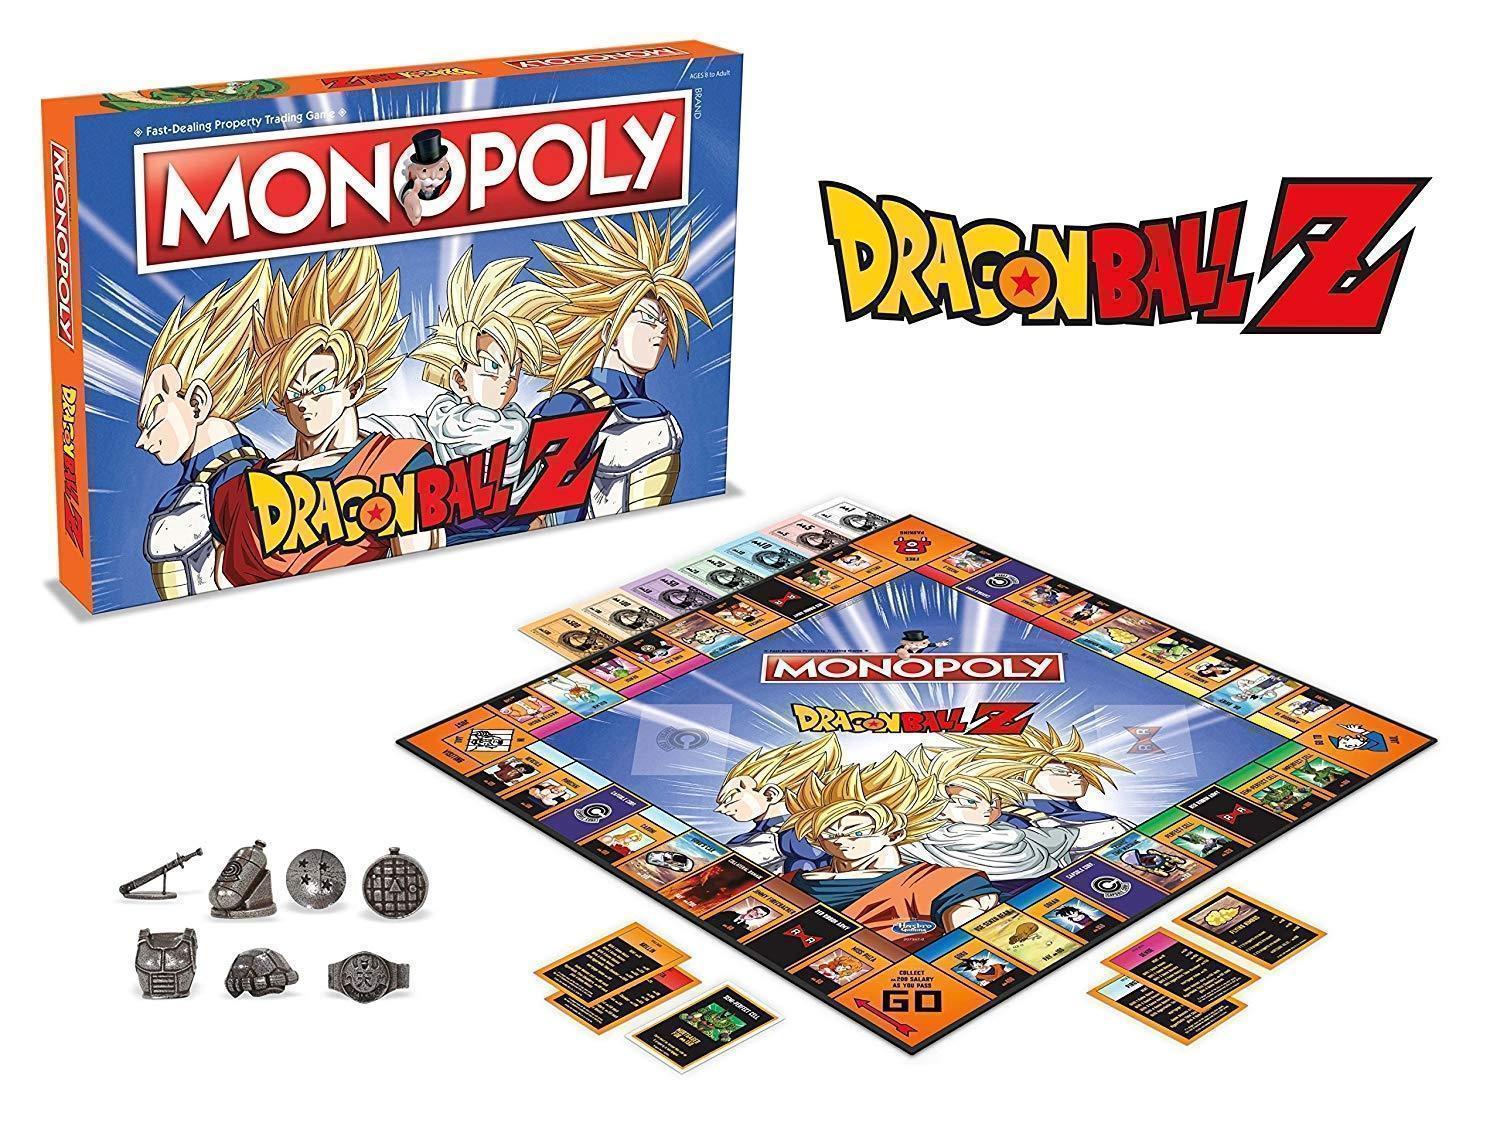 Dragon Ball Z Edition Monopoly Board Game Collectors Item Fast Trading Game